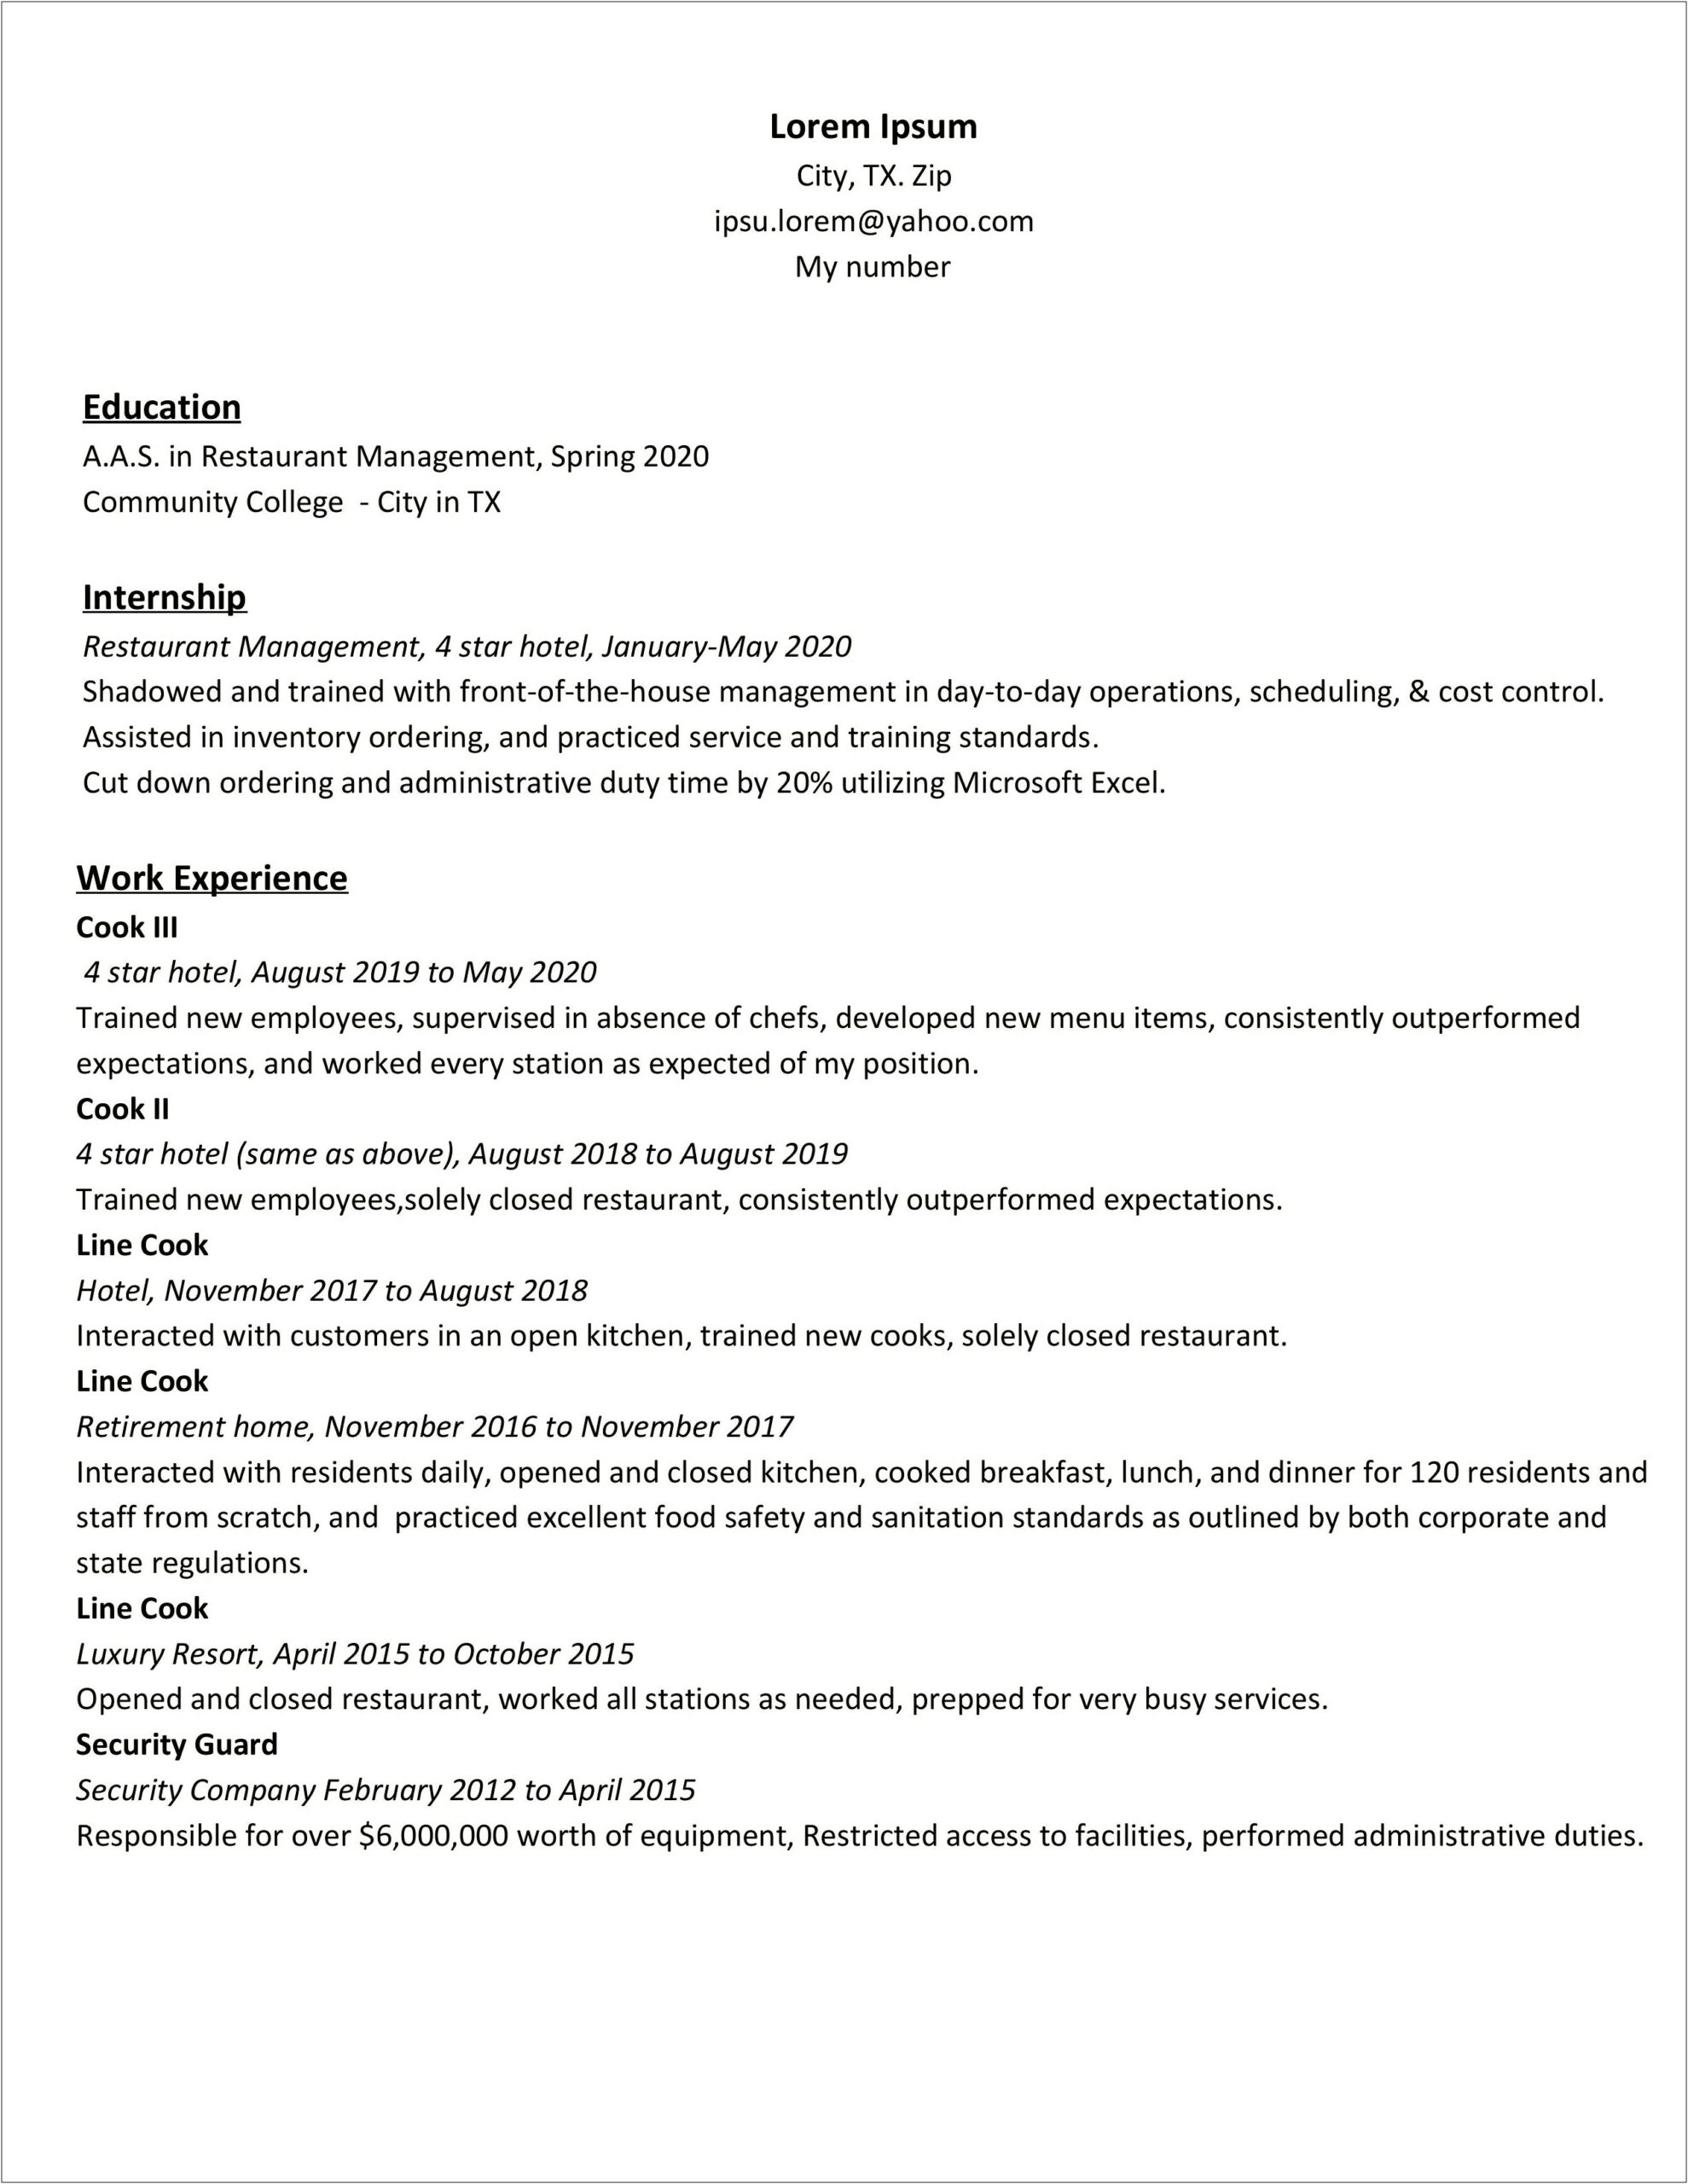 Resume For Front Of House Restaurant Manager